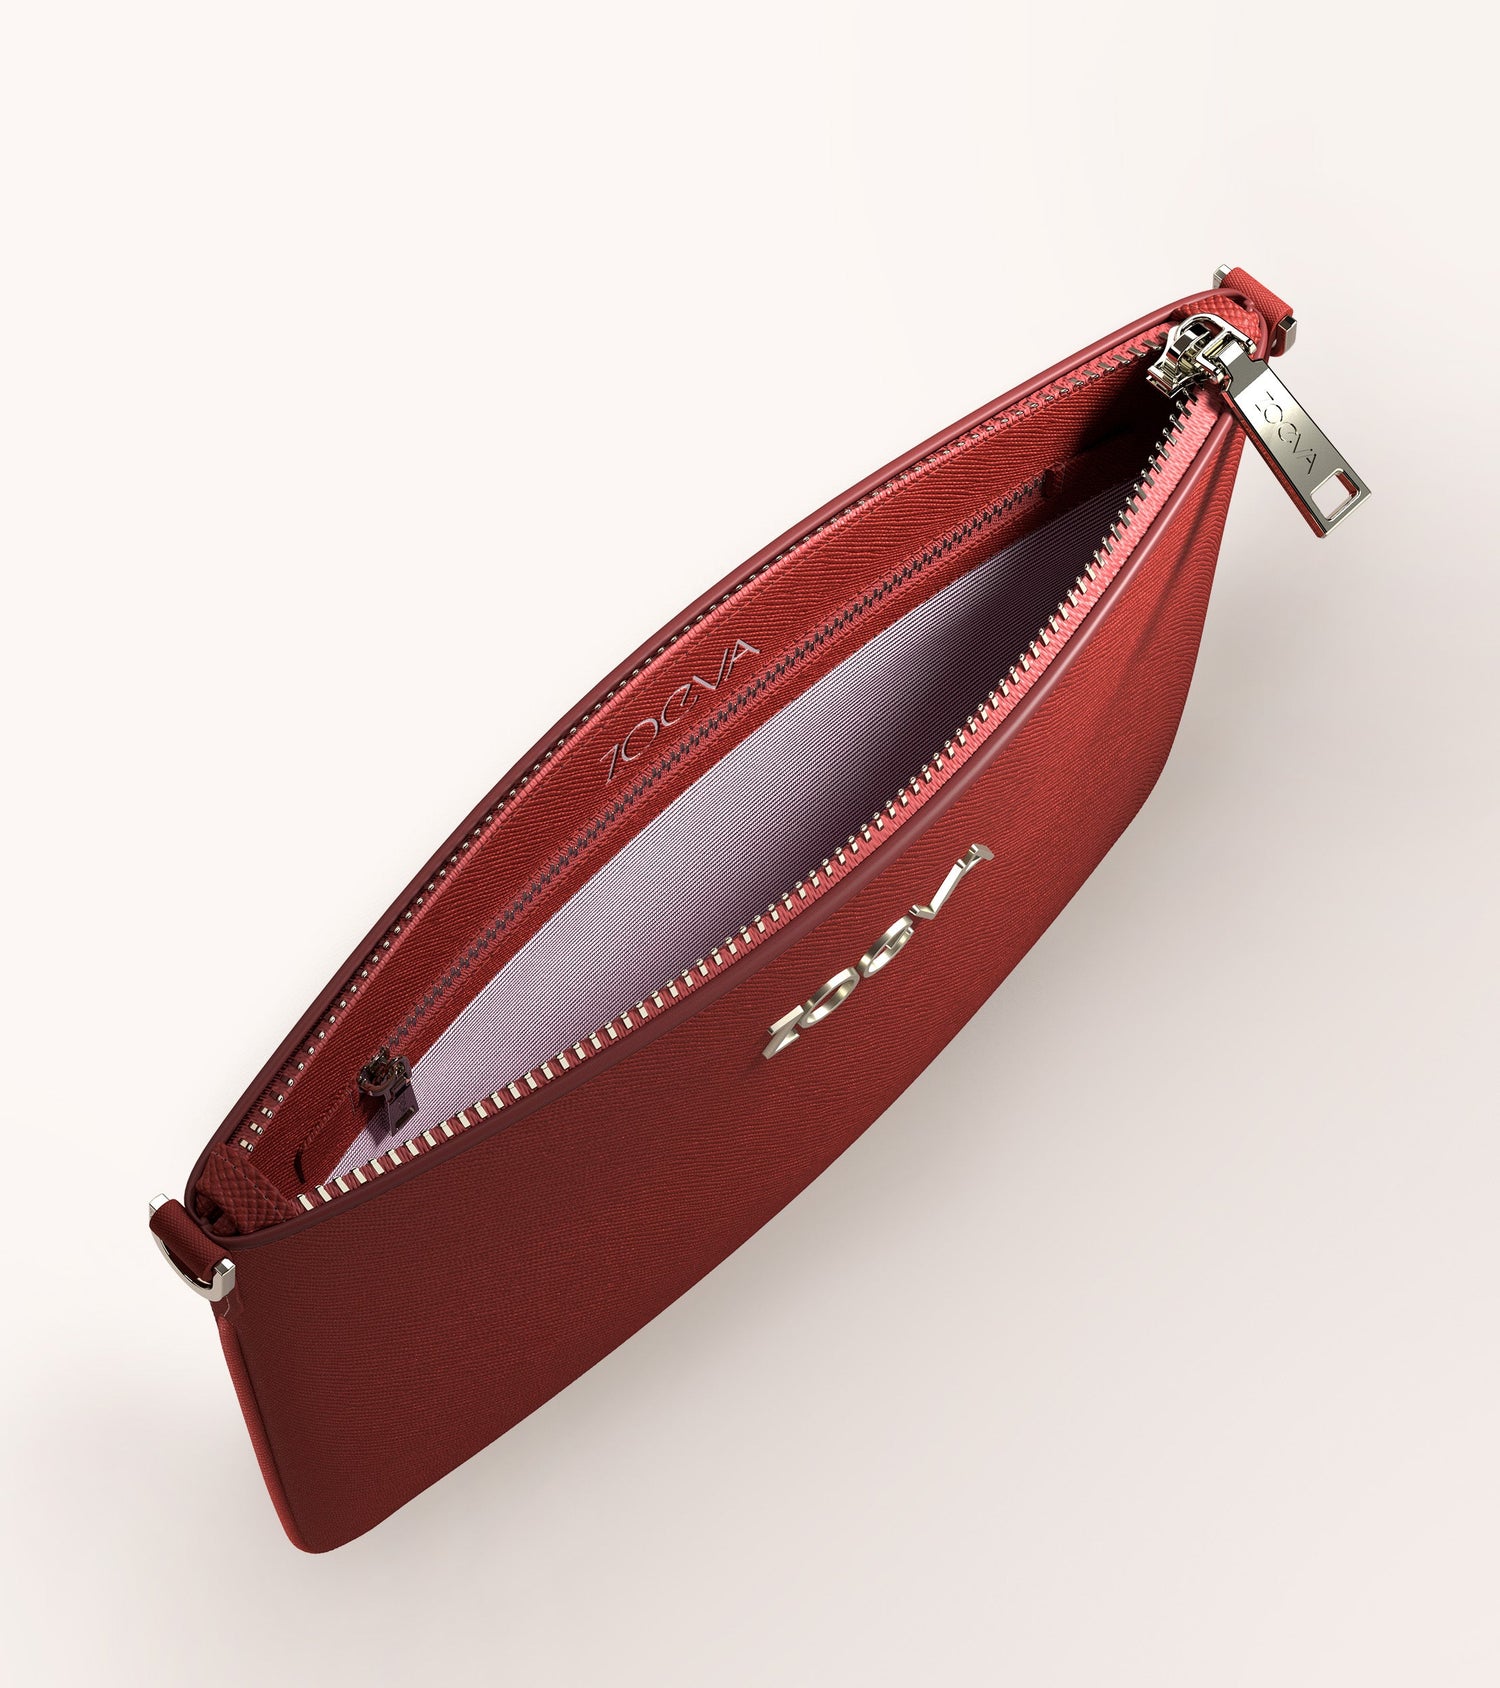 The Everyday Clutch & Shoulder Strap (Cherry) Main Image featured